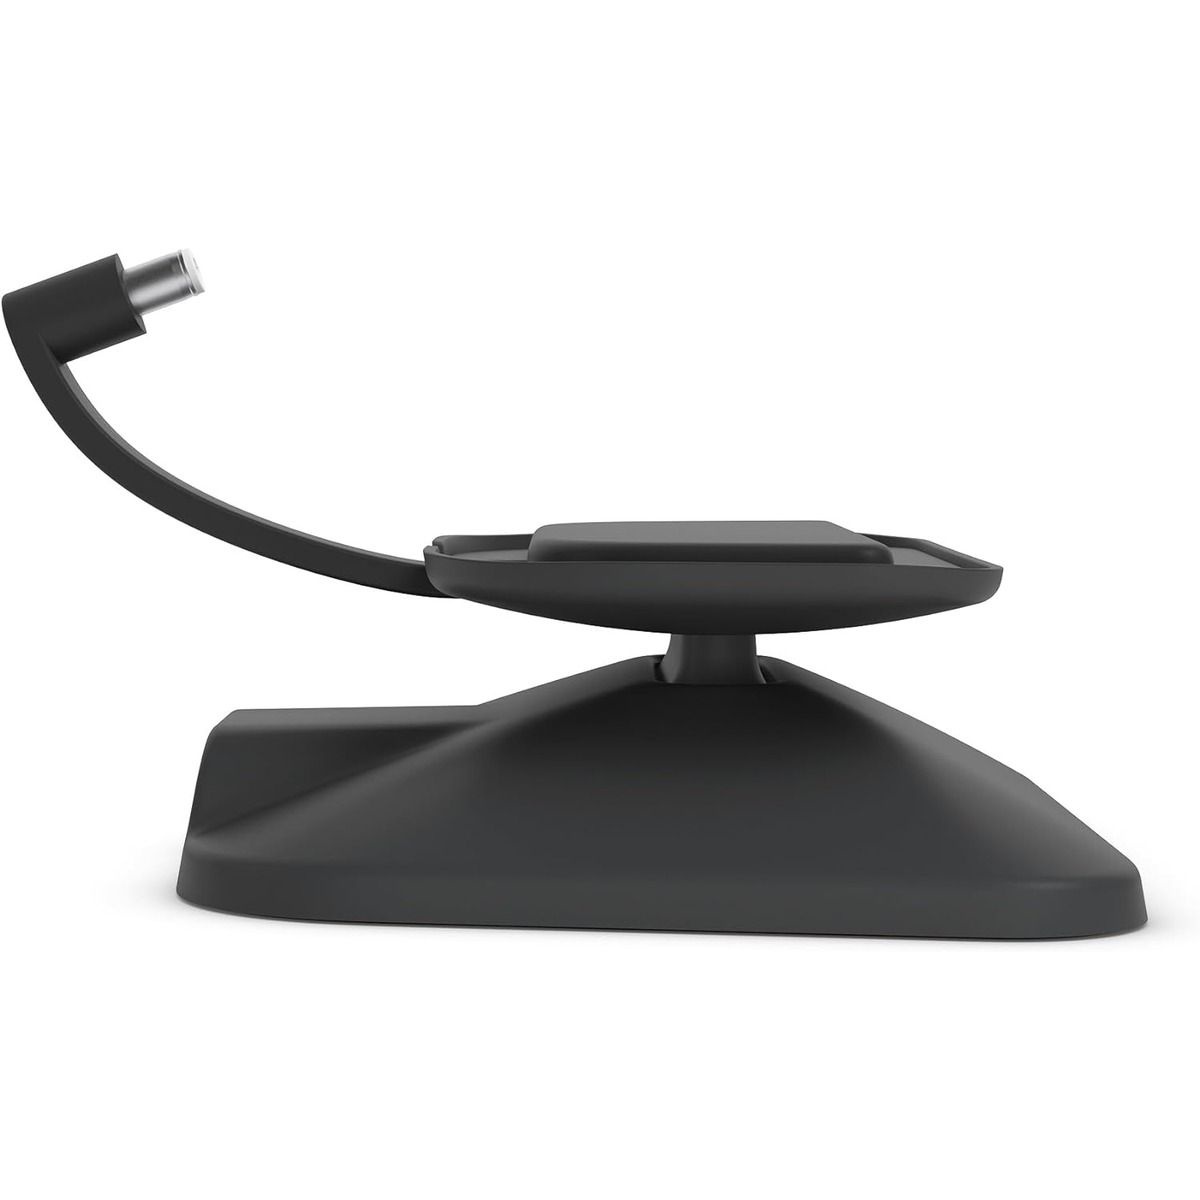 Made for  Echo Show 5 Premium Tilt + Swivel Stand - Easily Adjustable  with Magnet Glide Technology - Black